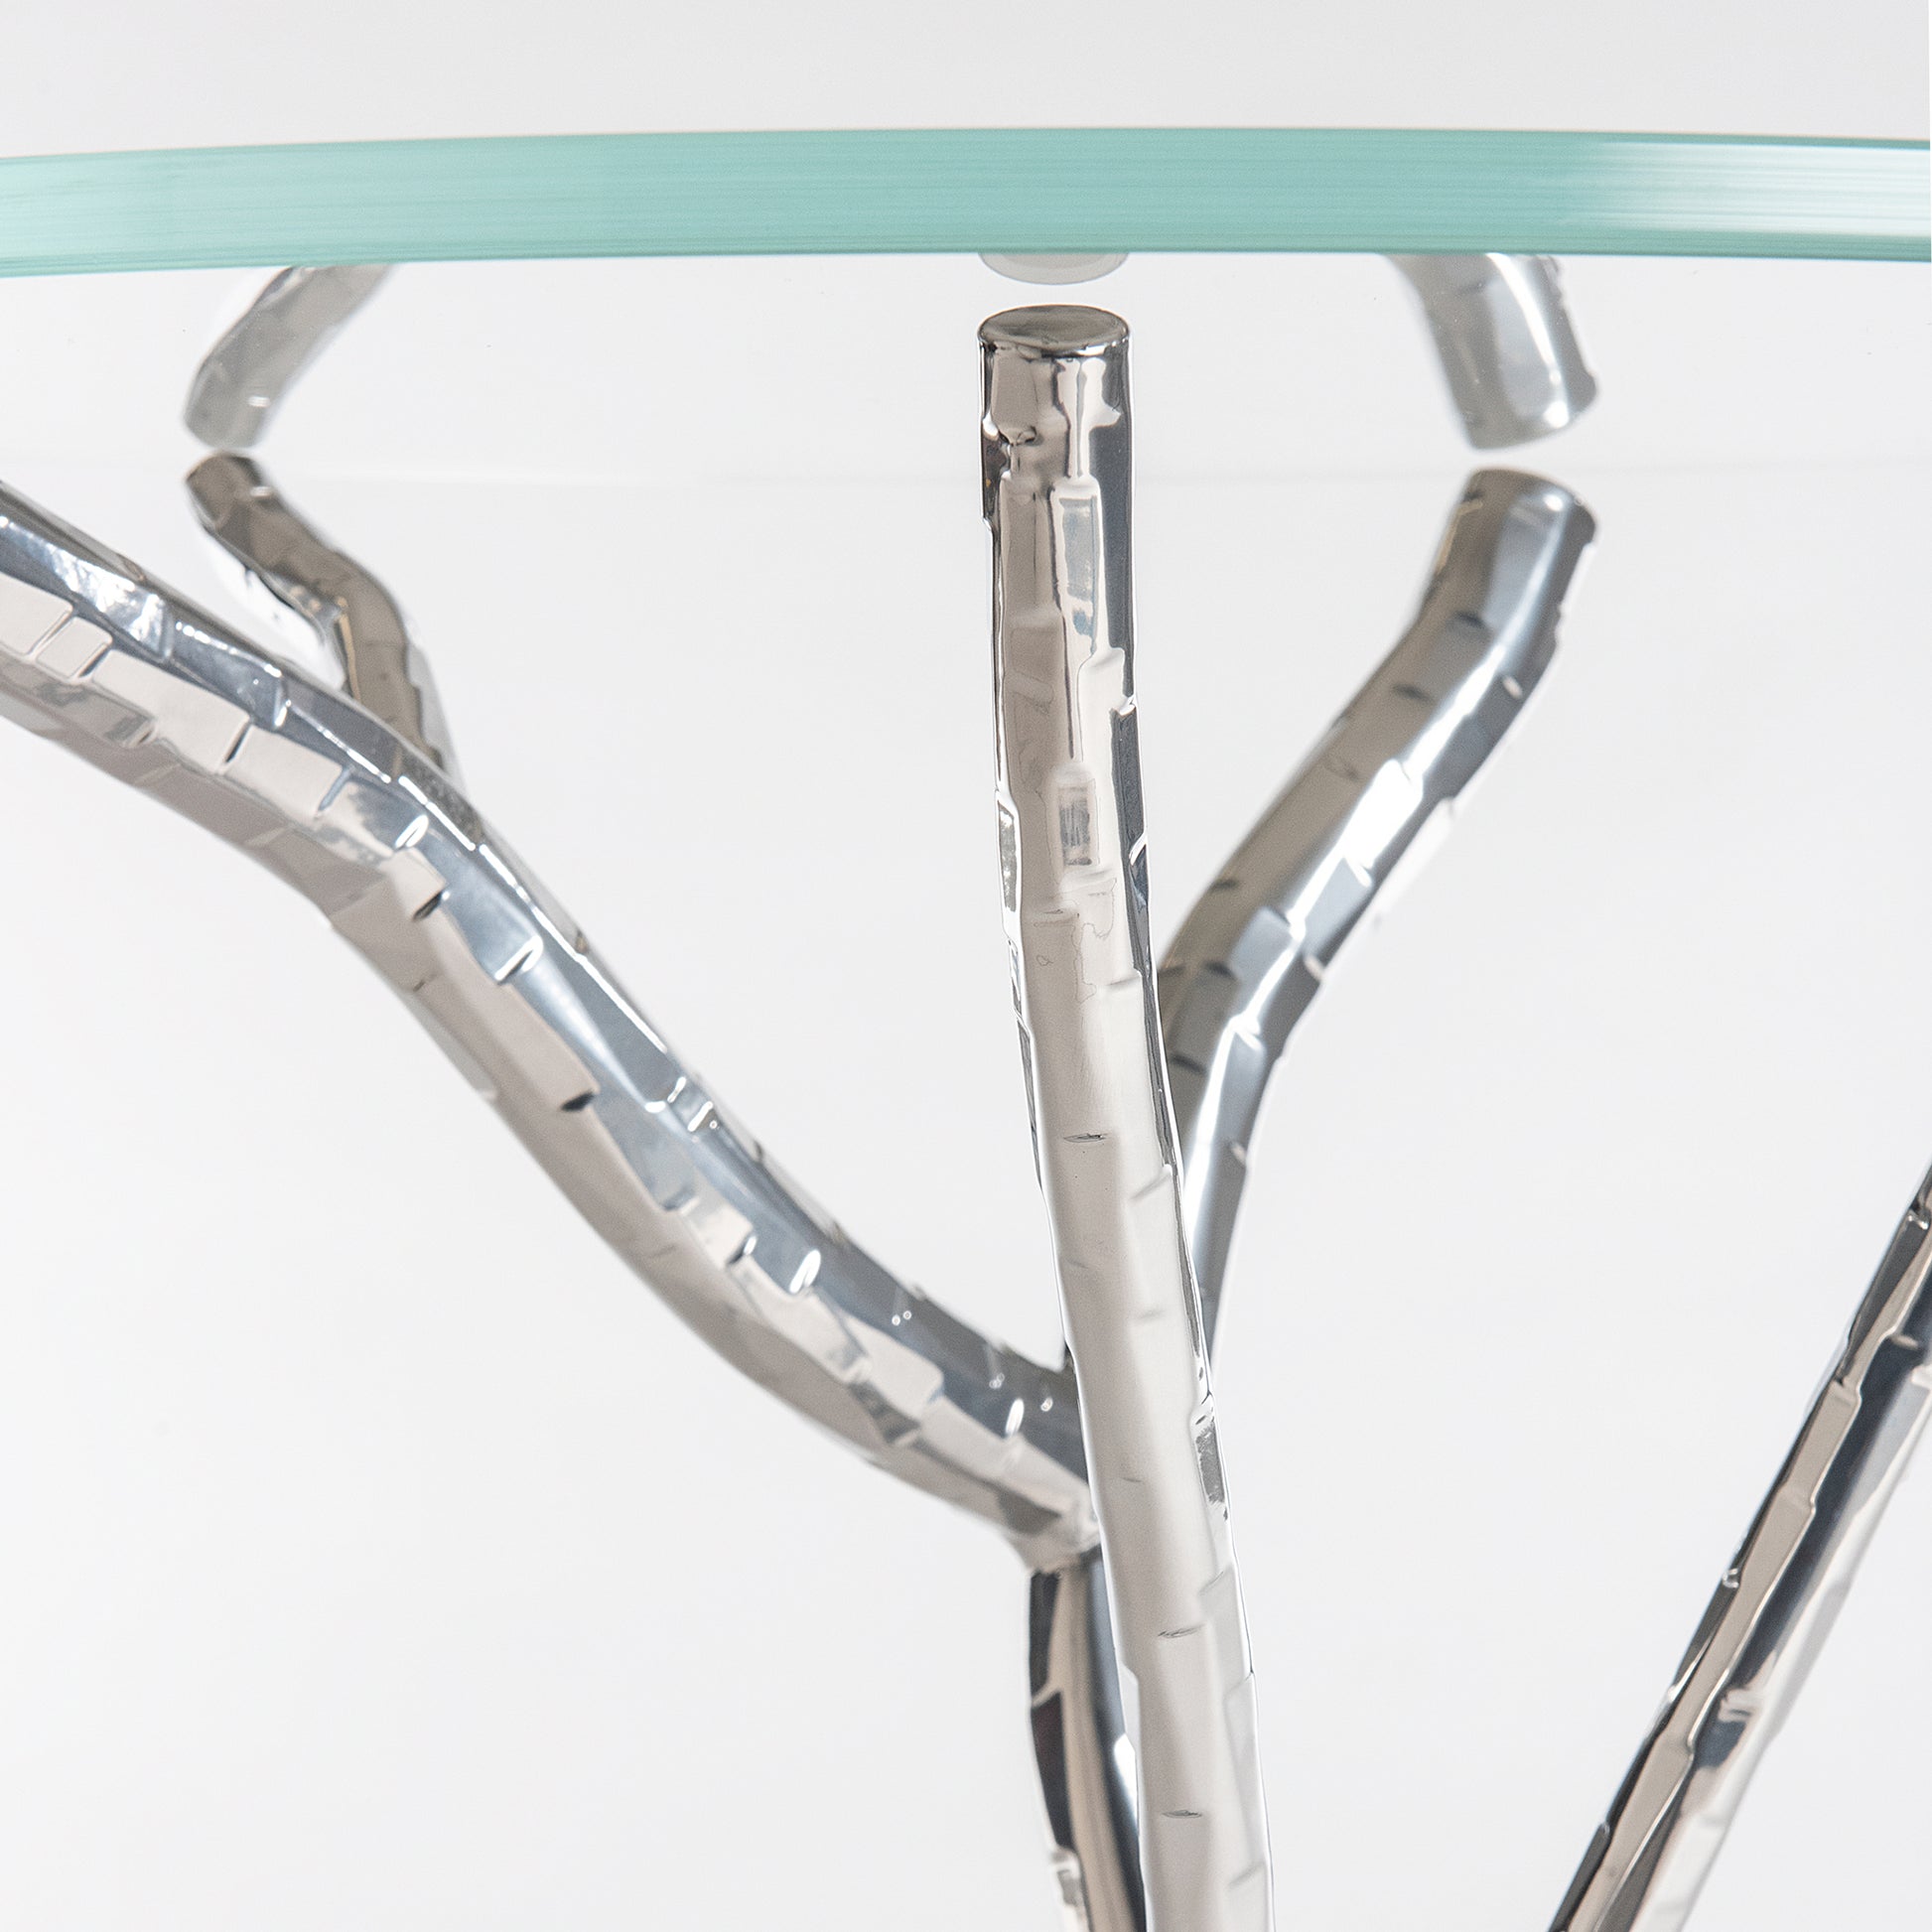 The Hubbardton Forge Brindille Accent Table, a hand-hammered steel base occasional table, features branches on its glass surface.